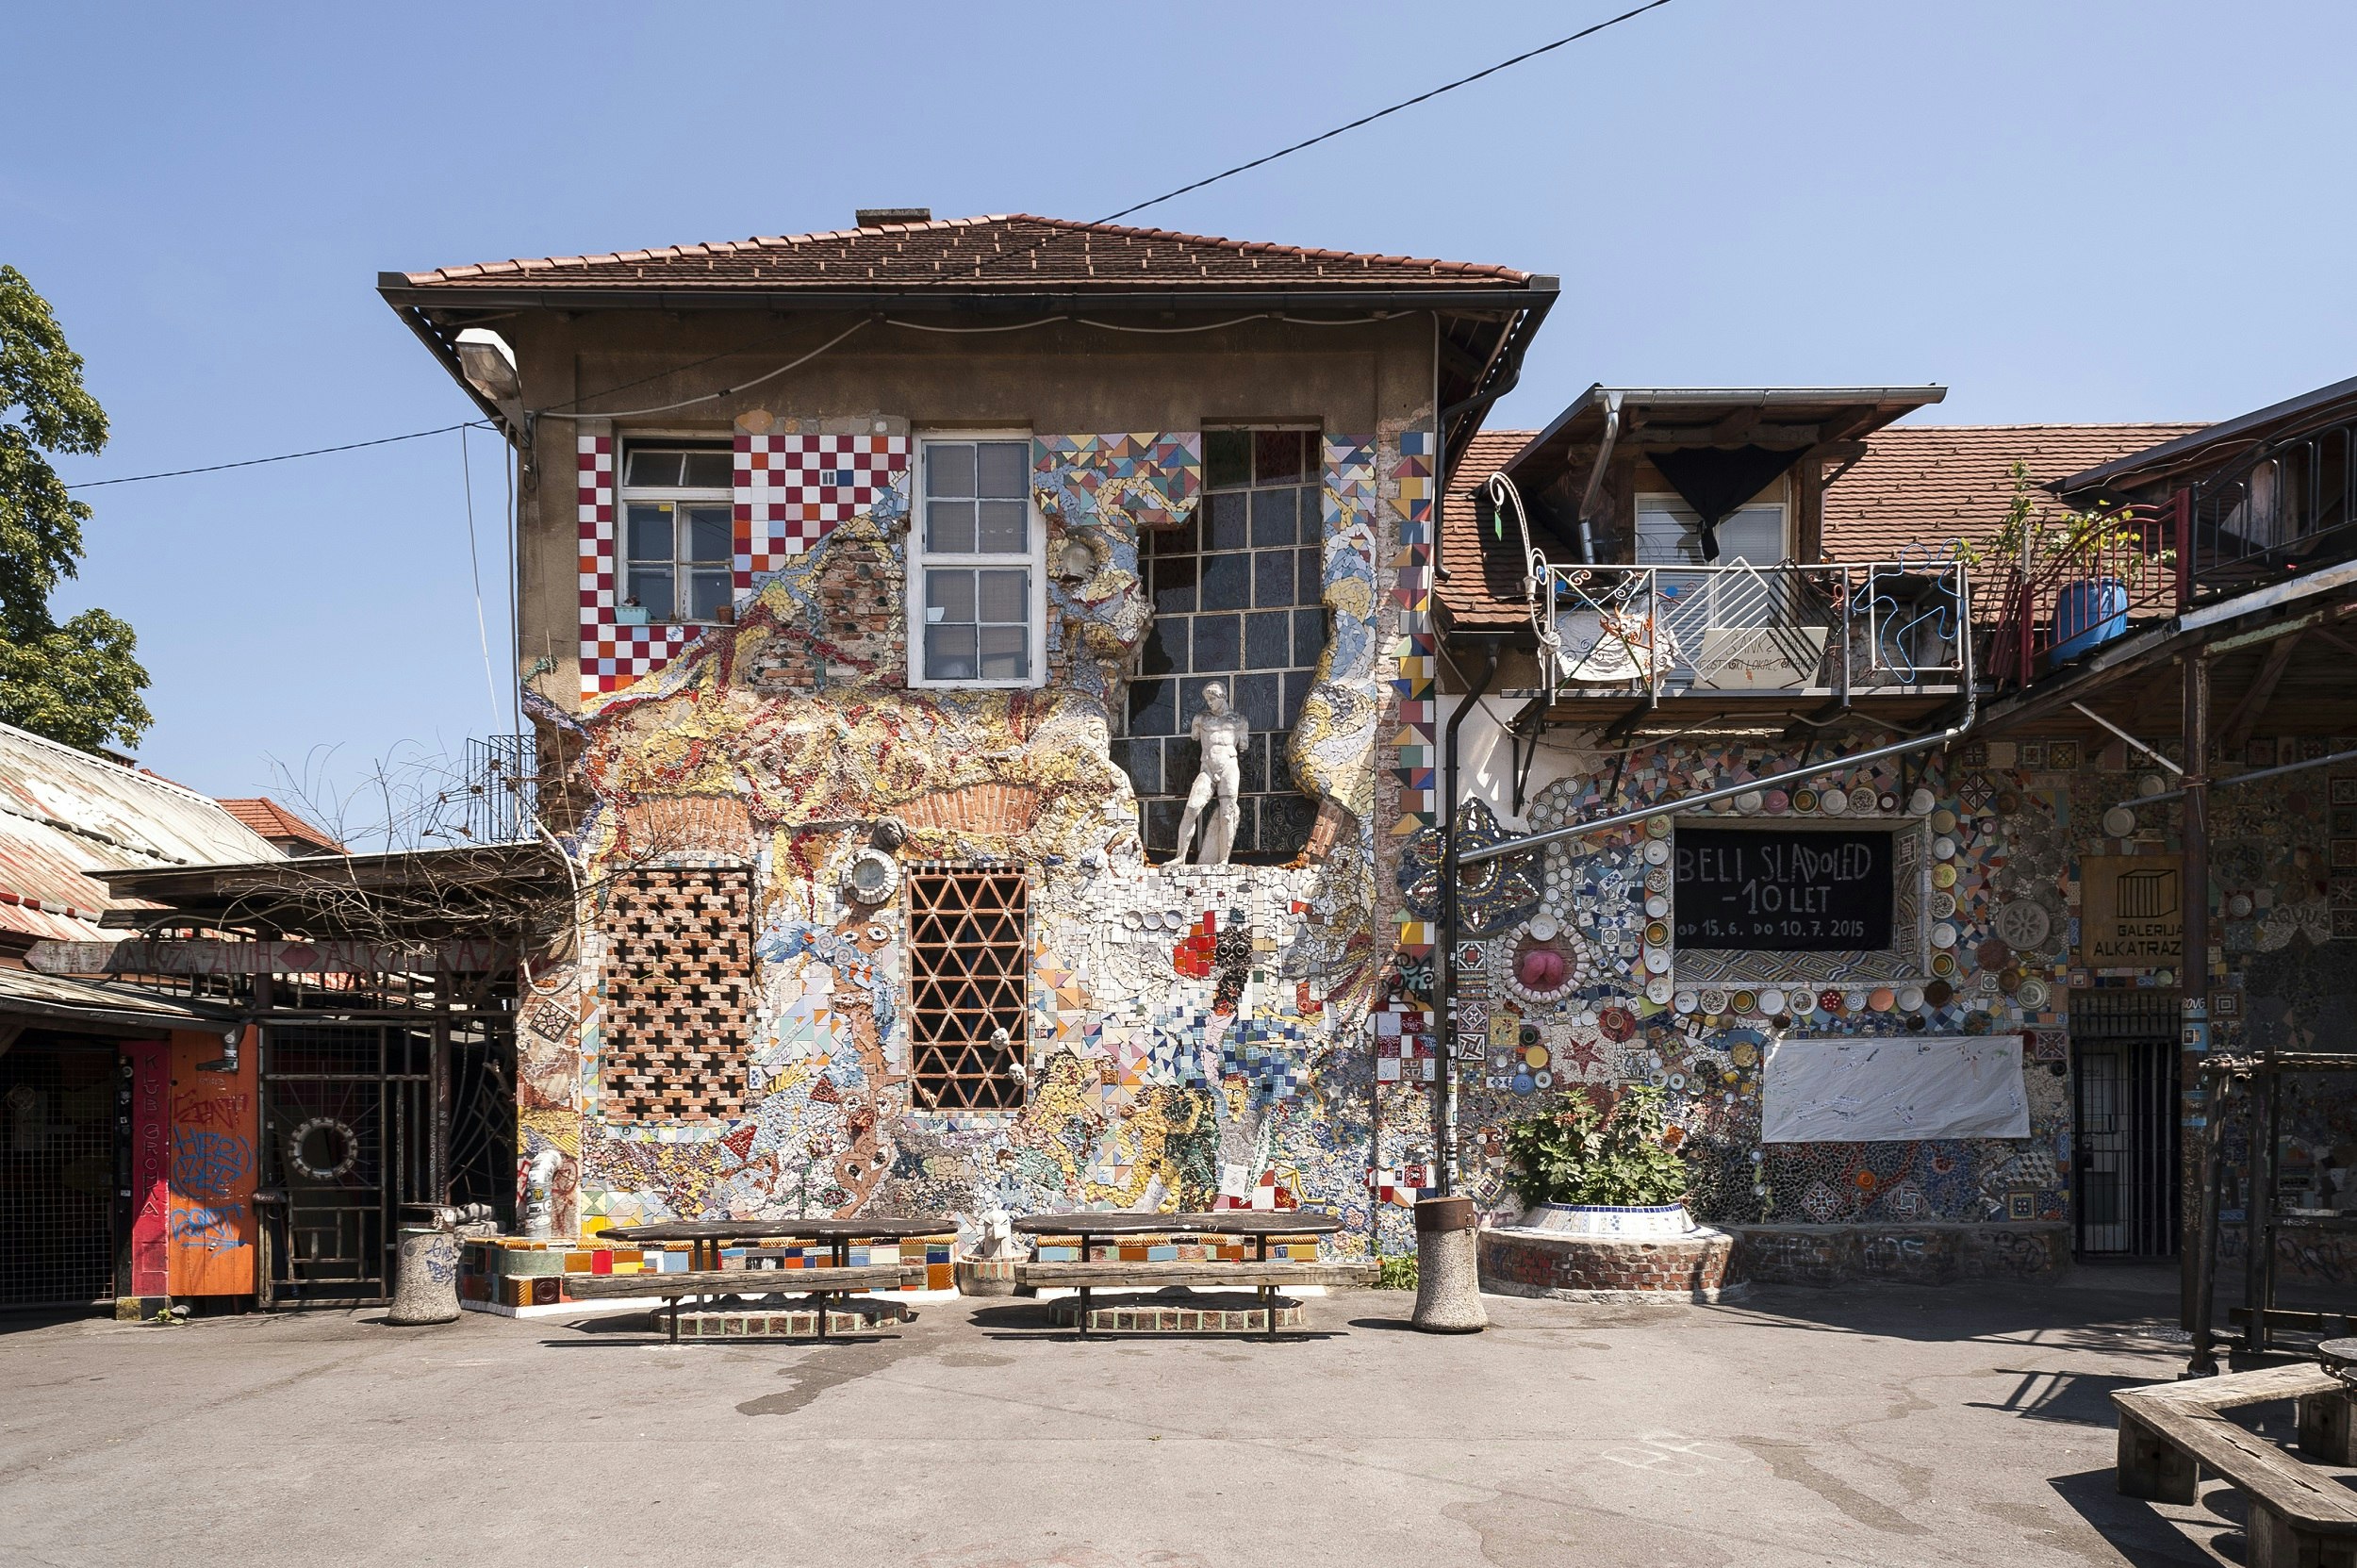 The exterior of a building covered in mosaics, sculptures, graffiti and other artworks